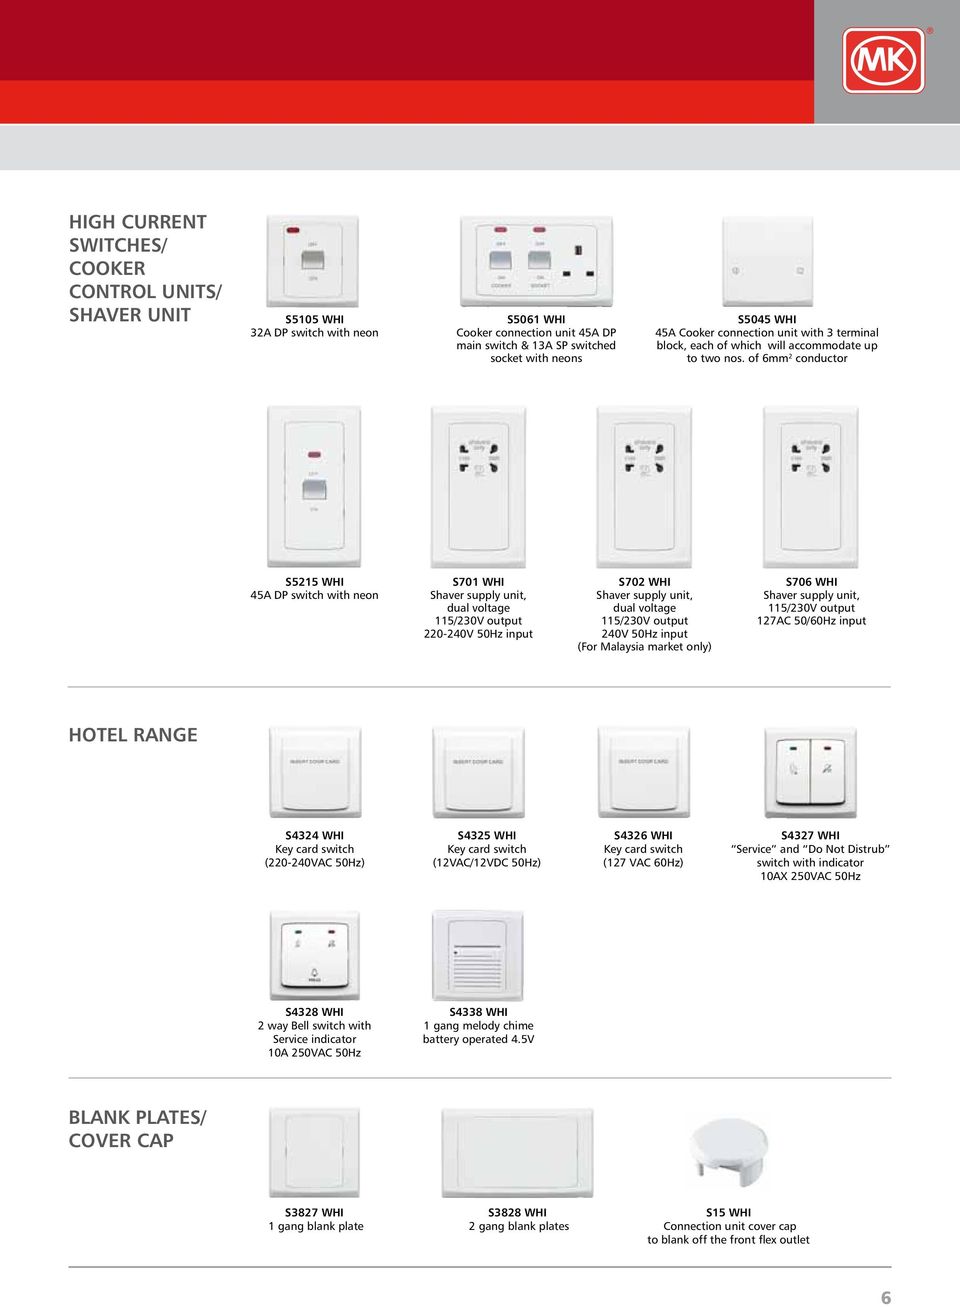 of 6mm 2 conductor S5215 WHI 45A DP switch with neon S701 WHI Shaver supply unit, dual voltage 115/230V output 220-240V 50Hz input S702 WHI Shaver supply unit, dual voltage 115/230V output 240V 50Hz